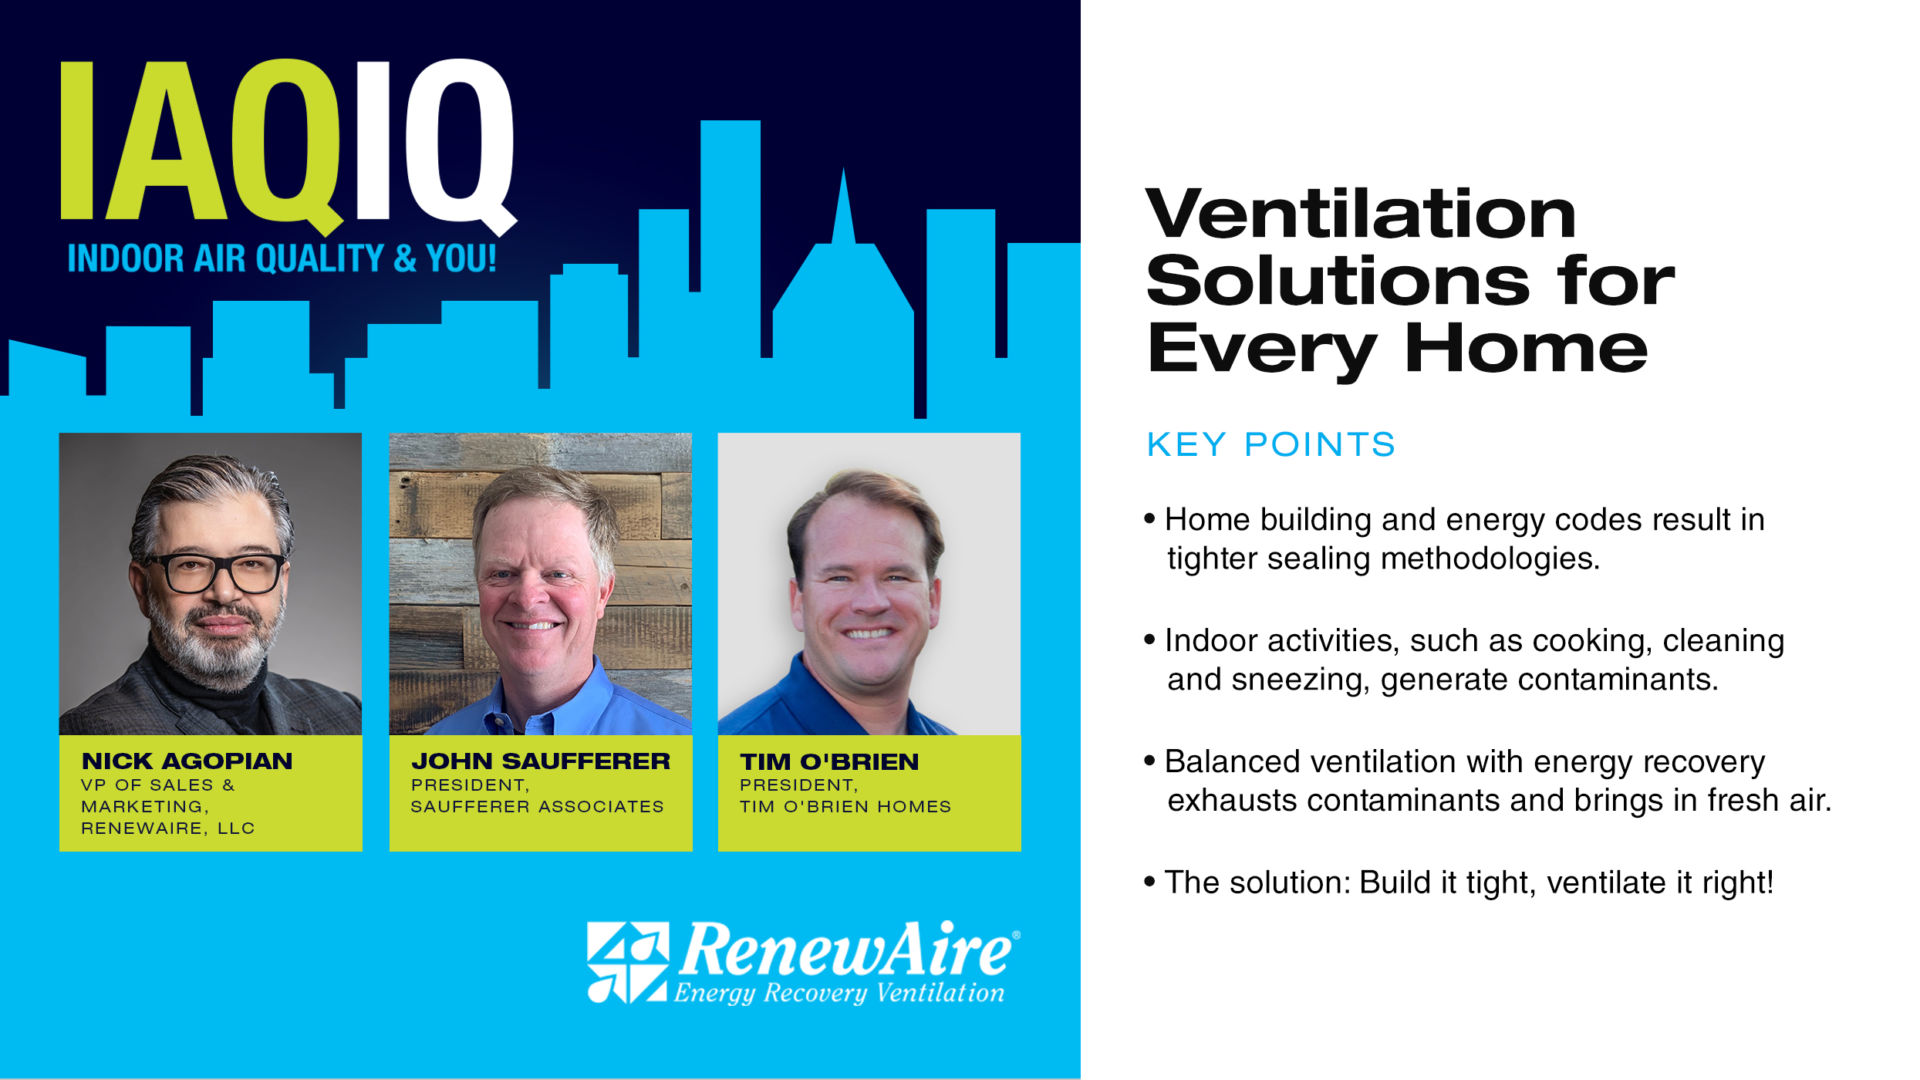 VENTILATION SOLUTIONS FOR EVERY HOME